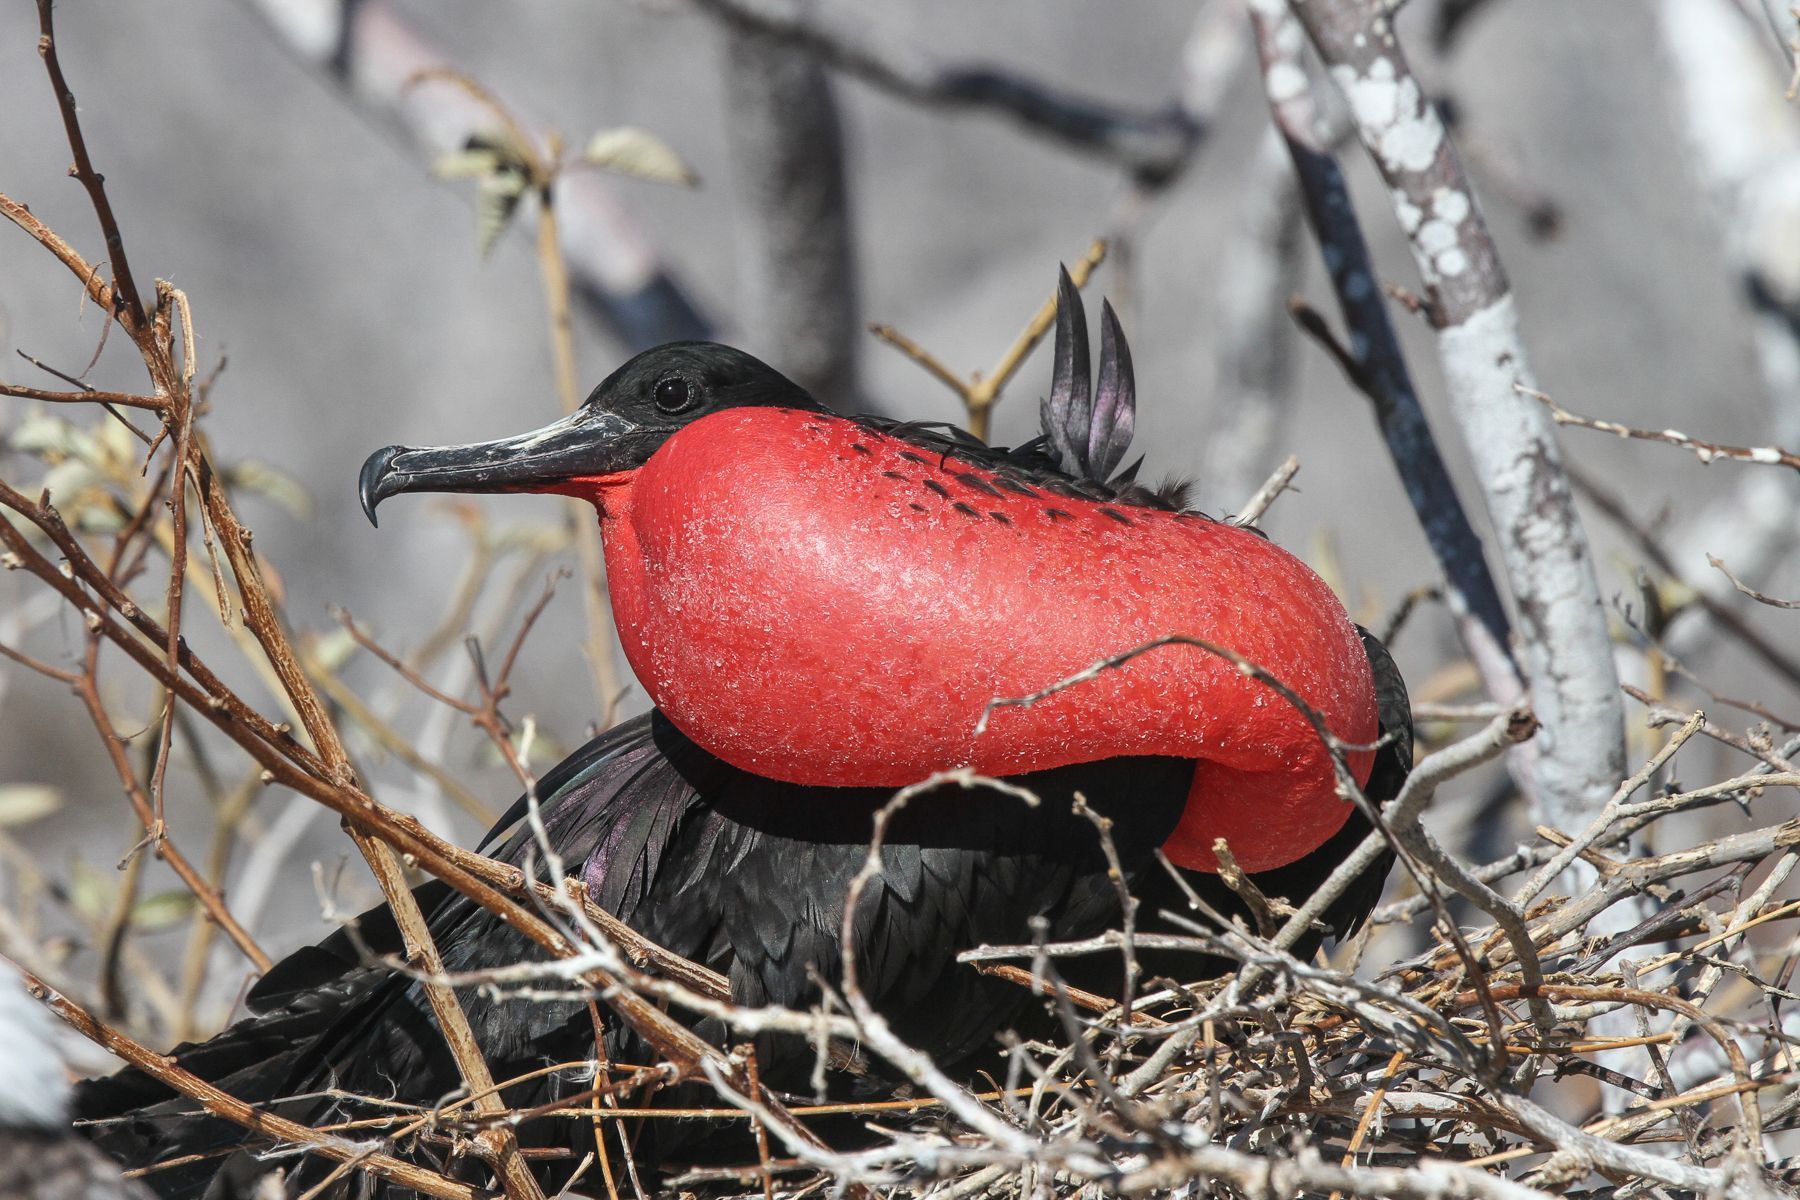 The males inflate their large red gular pouches until they are as large as balloons